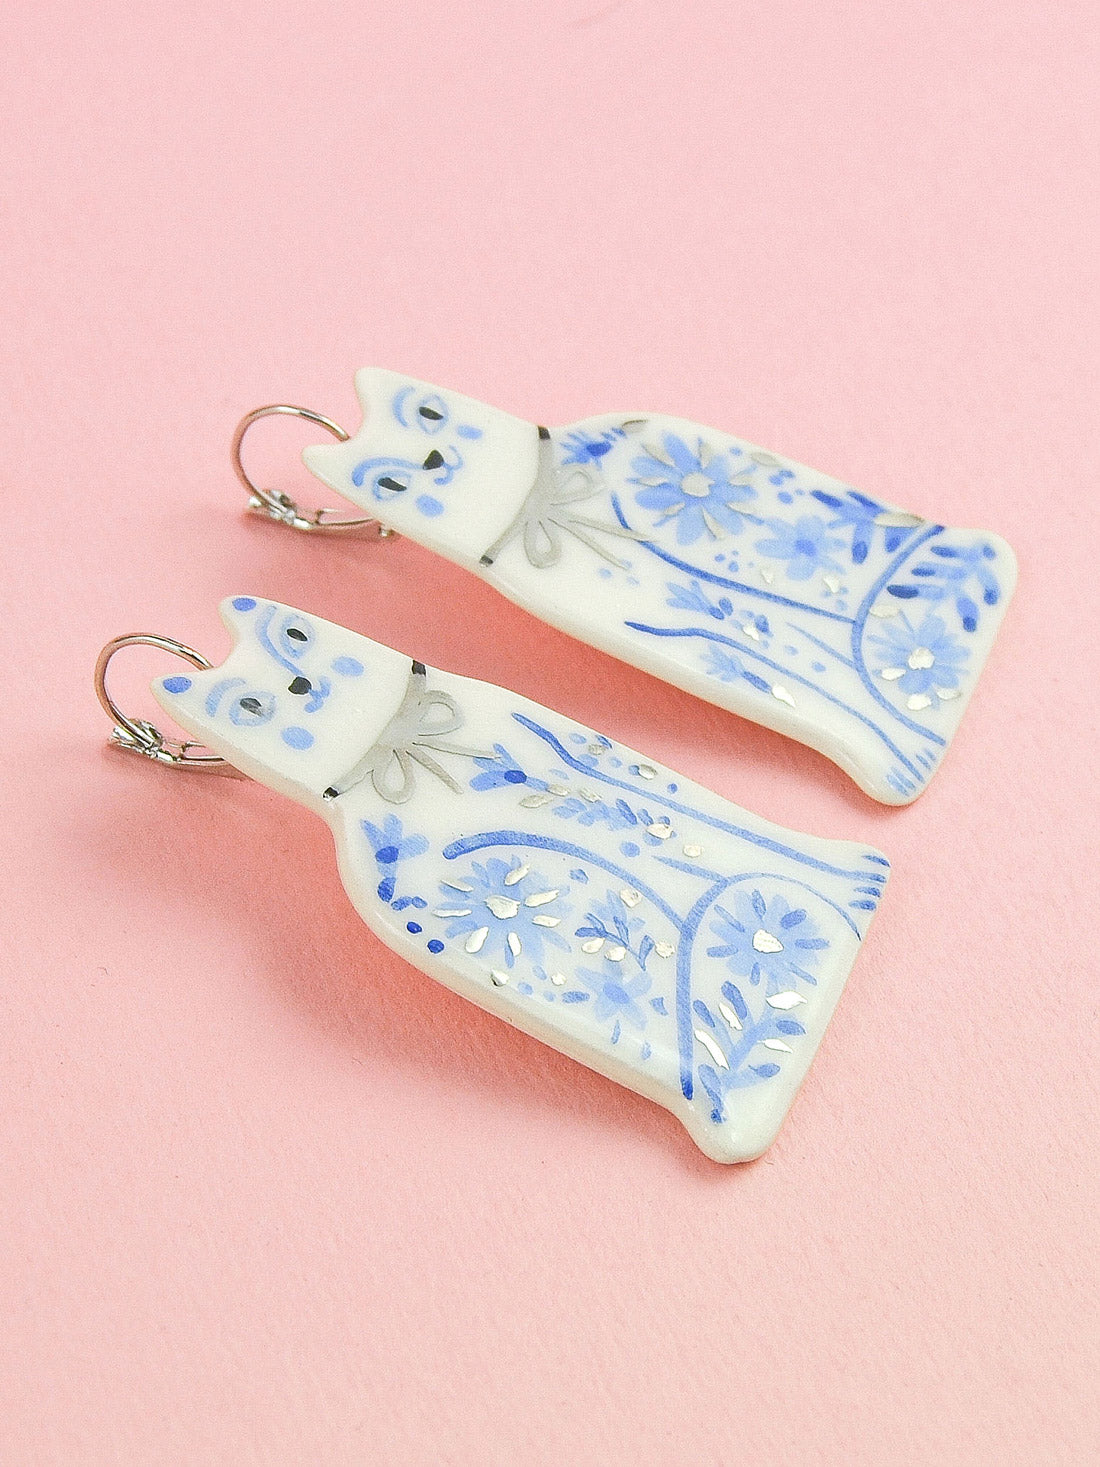 Ceramic Handpainted Cat Earrings with Flowers - Gold/Blue